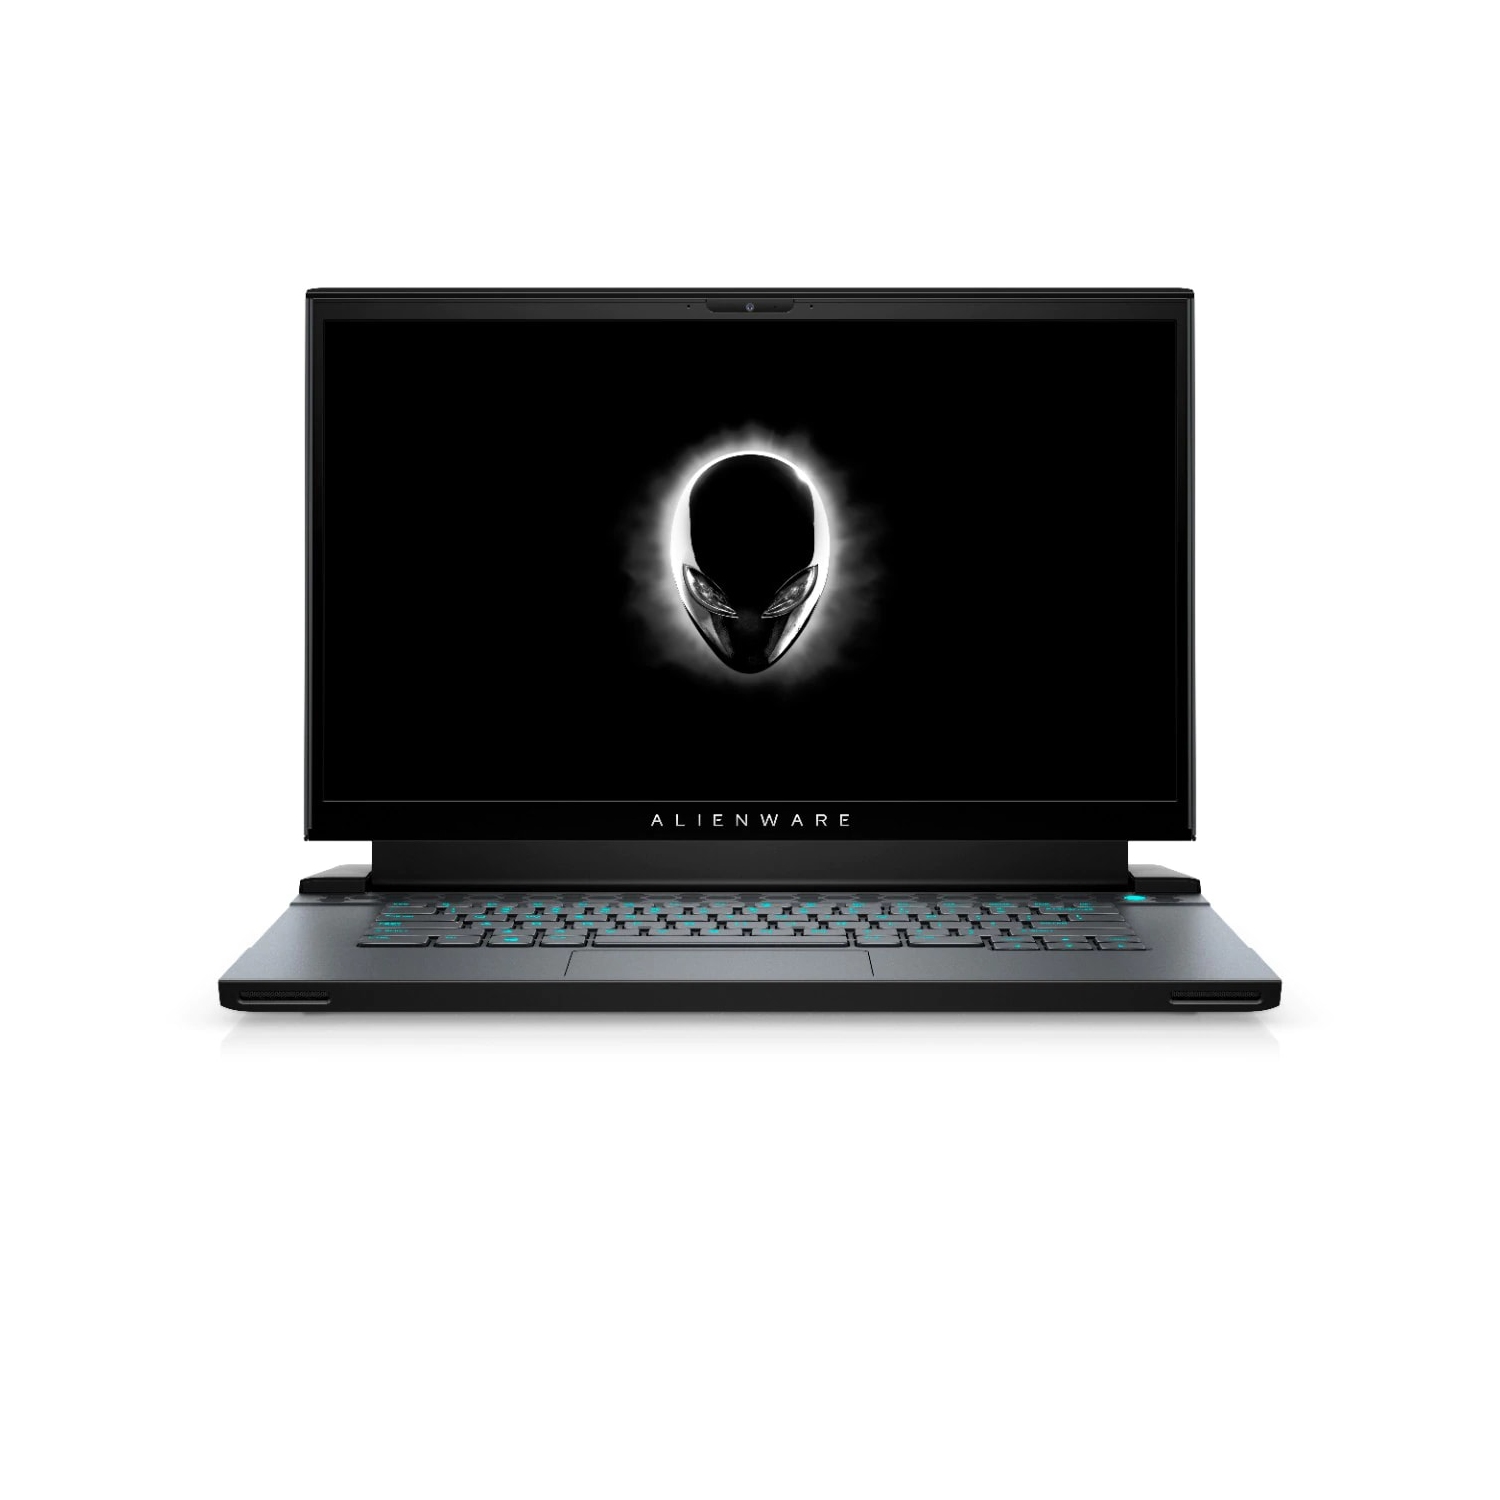 Refurbished (Excellent) - Dell Alienware m15 R4 Gaming Laptop (2021), 15.6" FHD, Core i7, 256GB SSD + 256GB SSD, 16GB RAM, RTX 3070, 5 GHz, 10th Gen CPU Certified